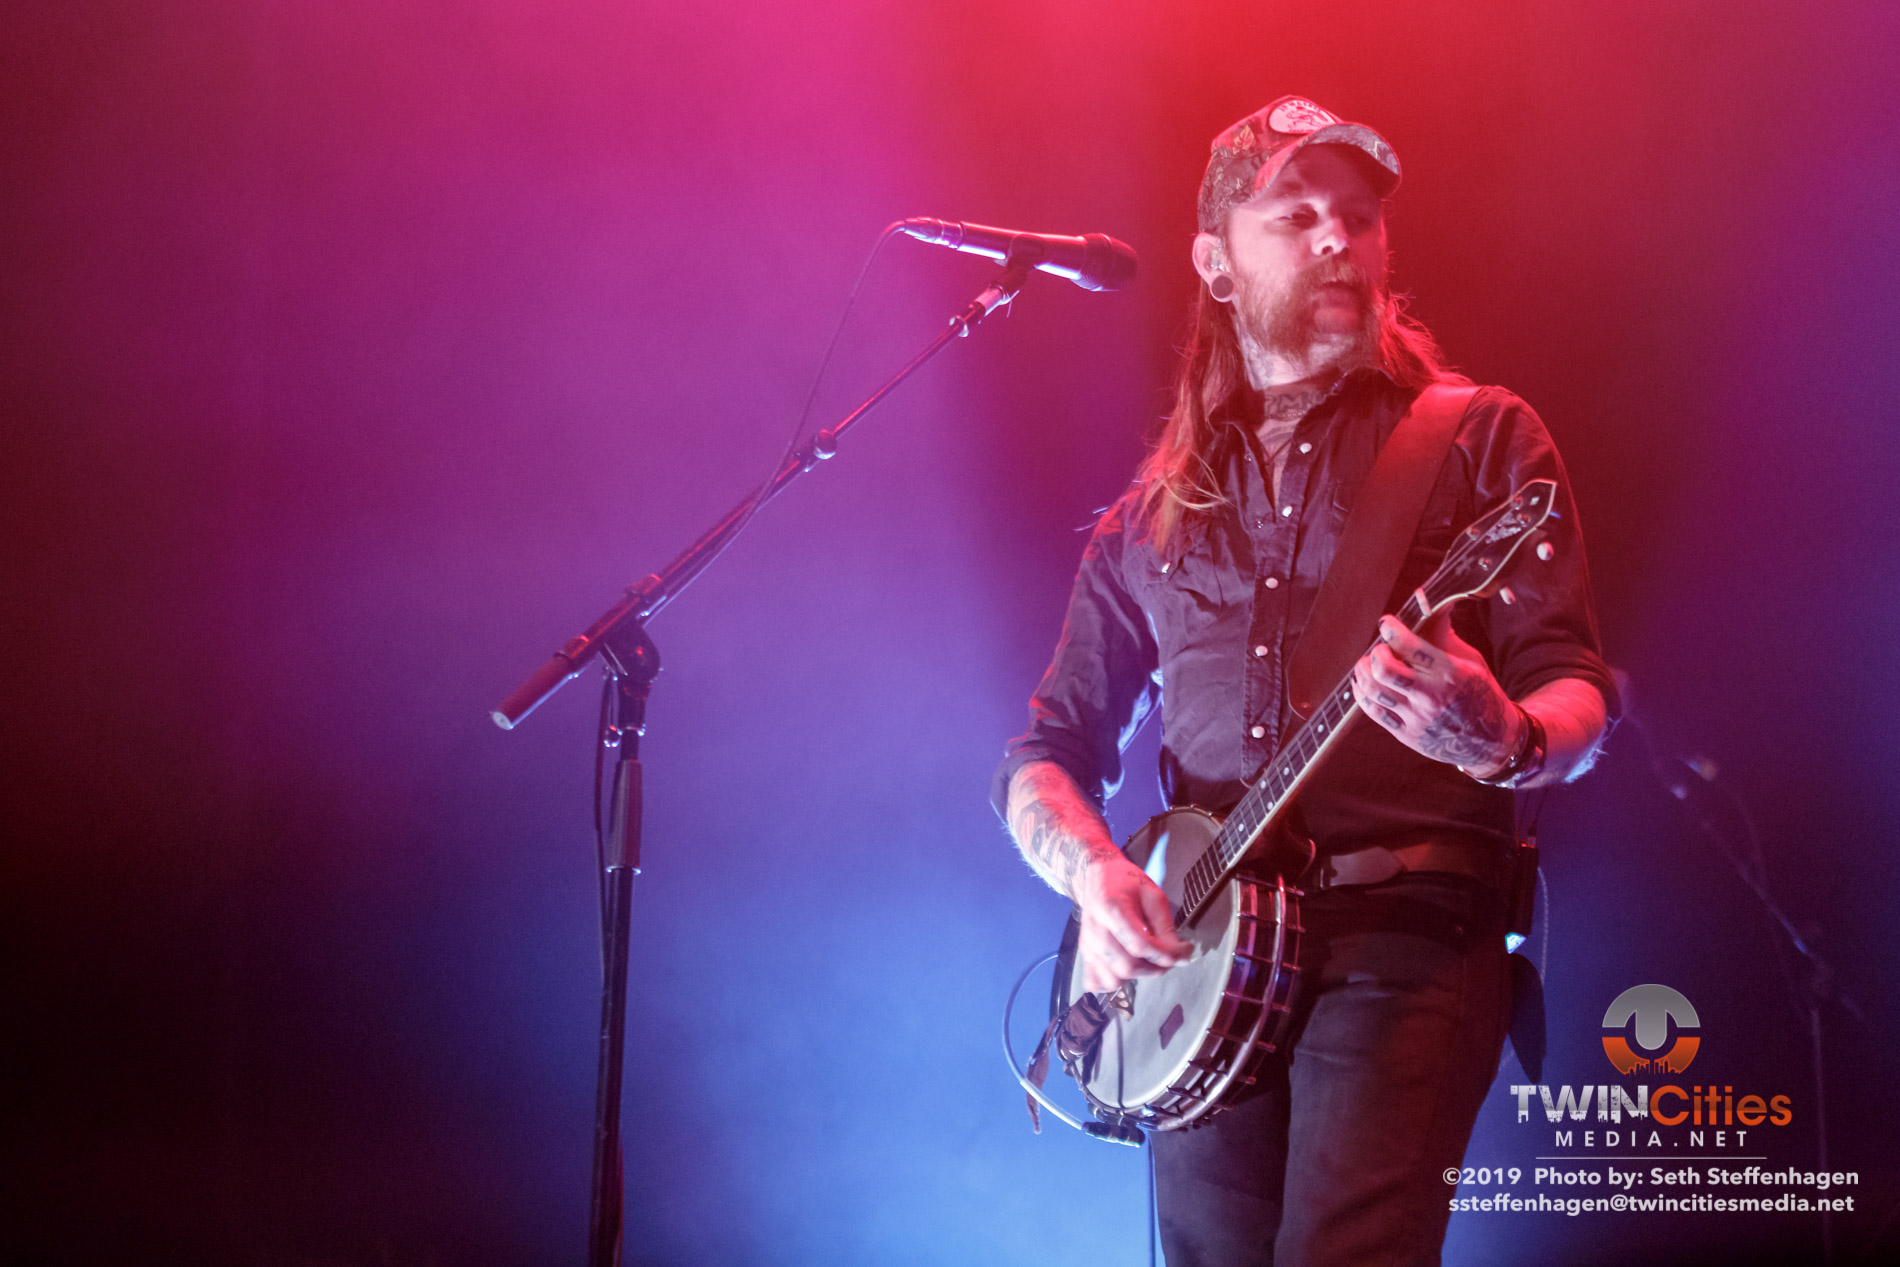 February 1, 2019 - Minneapolis, Minnesota, United States - The Devil Makes Three live in concert at First Avenue along with Lost Dog Street Band as the opener.(Photo by Seth Steffenhagen/Steffenhagen Photography)